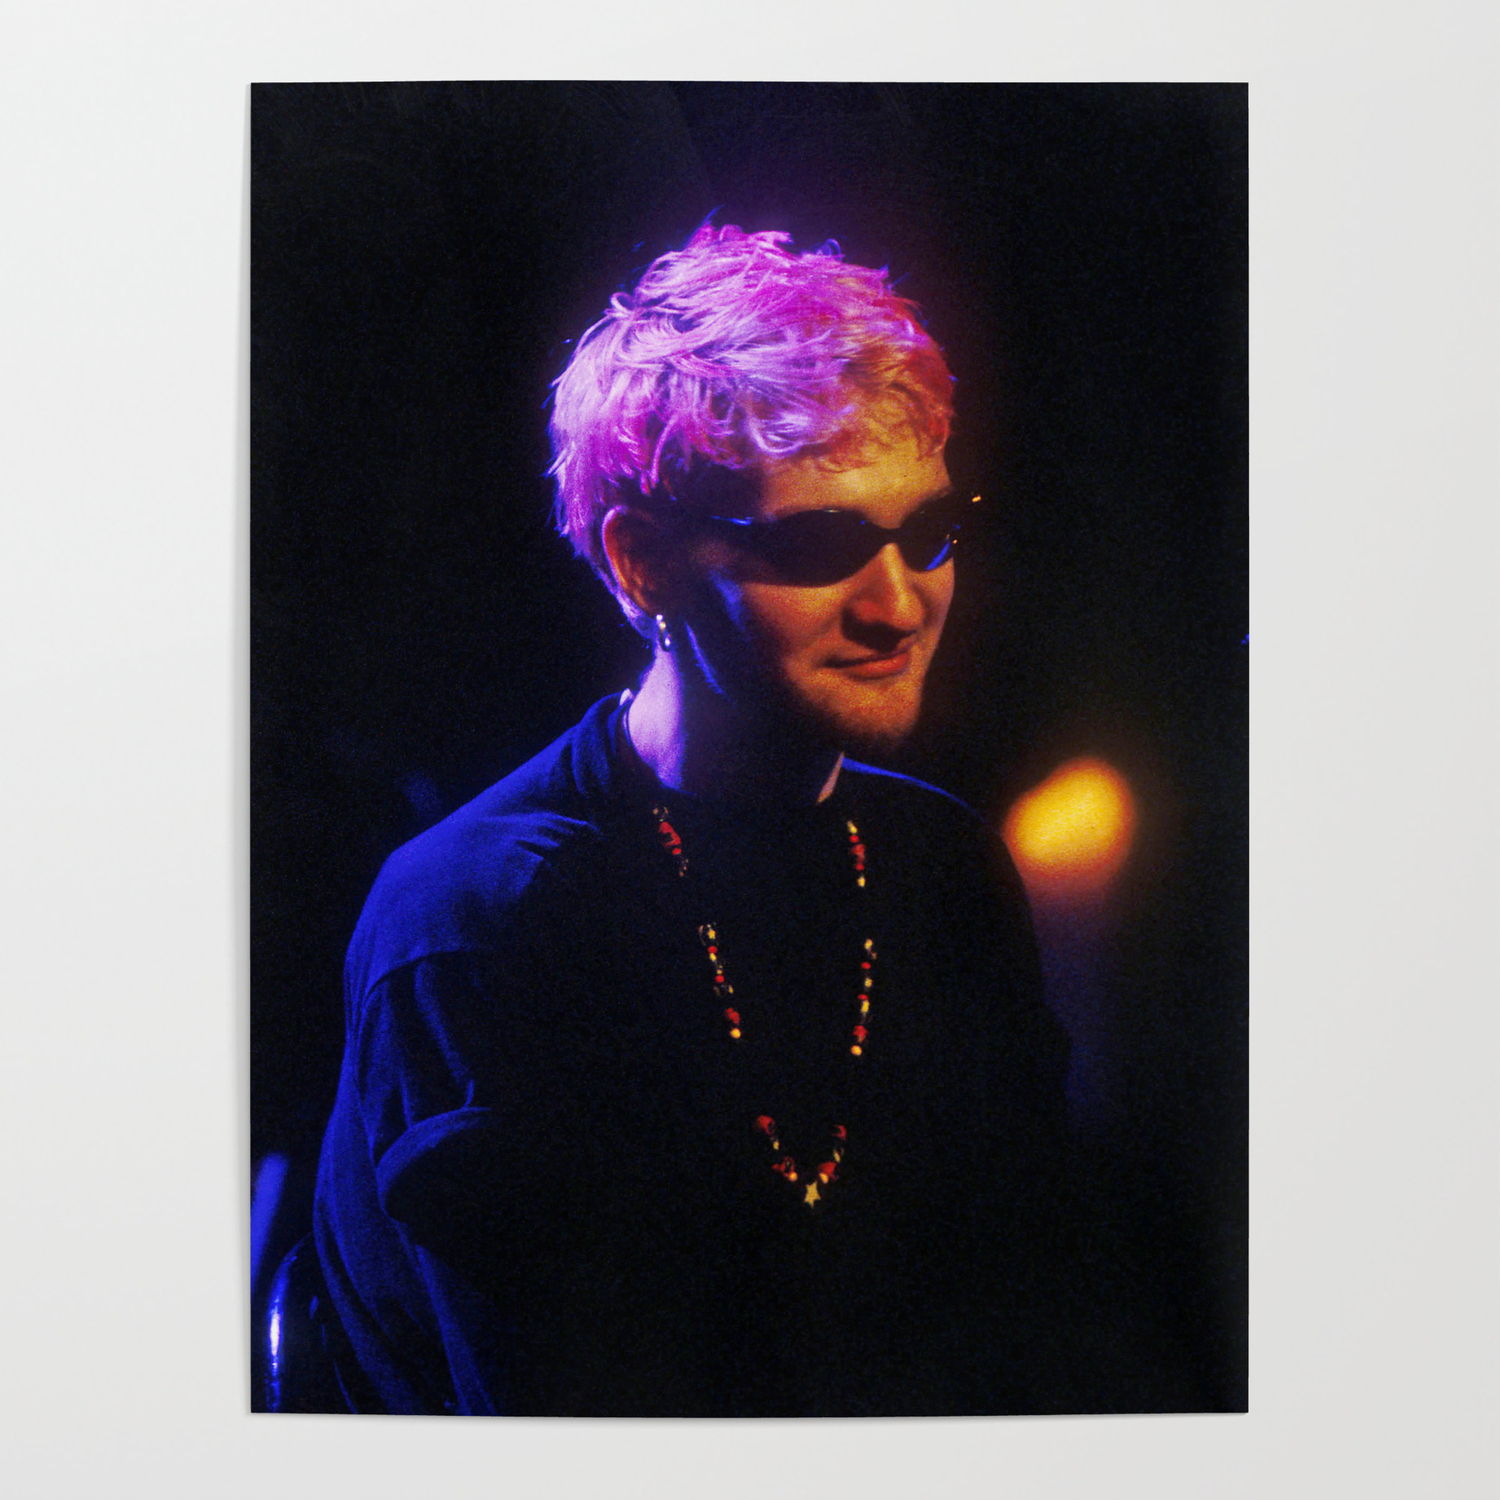 Layne Staley Wallpapers